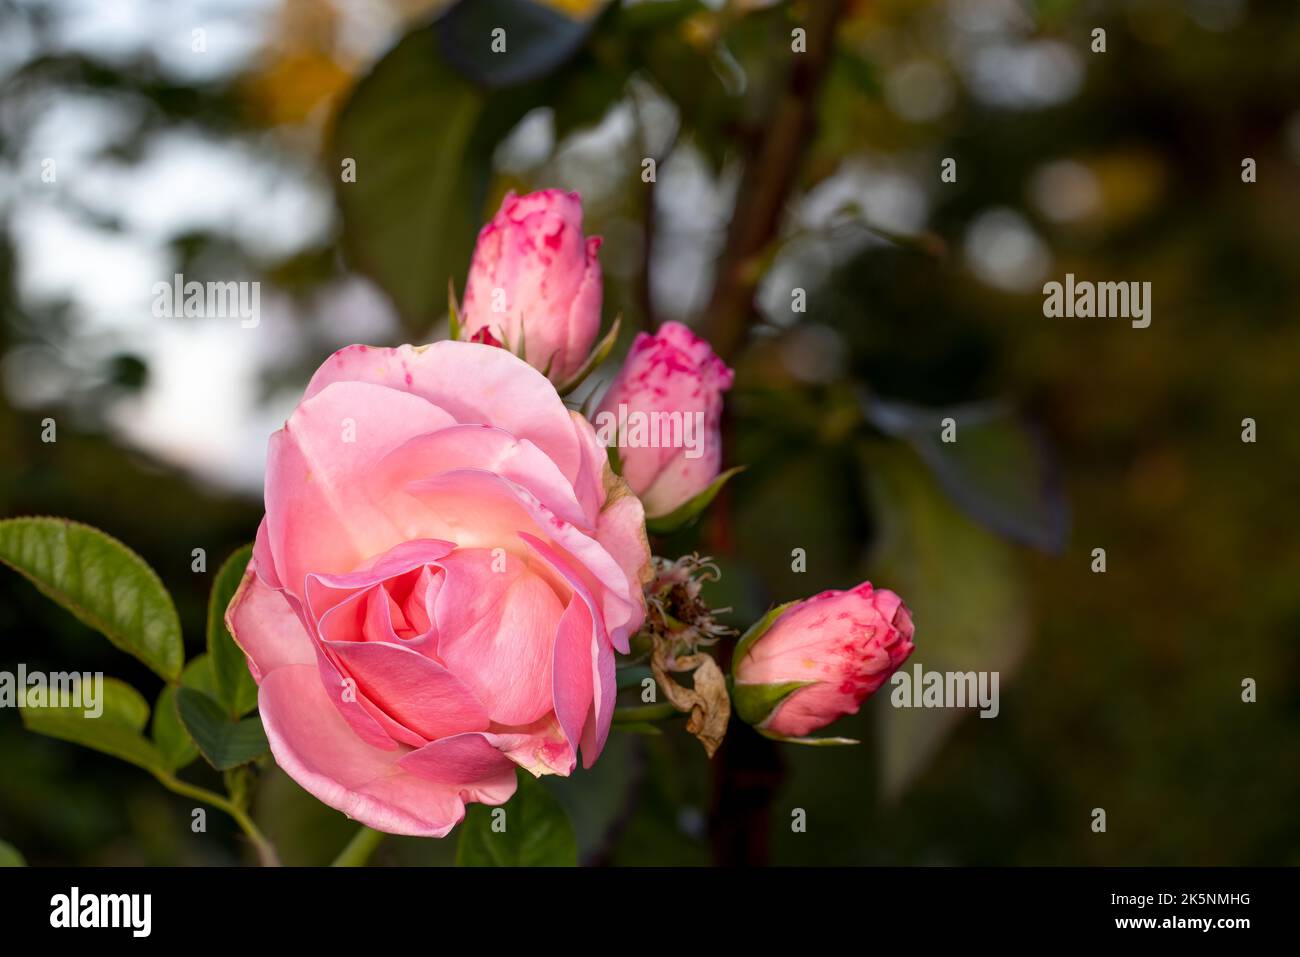 Sweet light pink tea rose with blurred background in the day light. Close up photo. Stock Photo